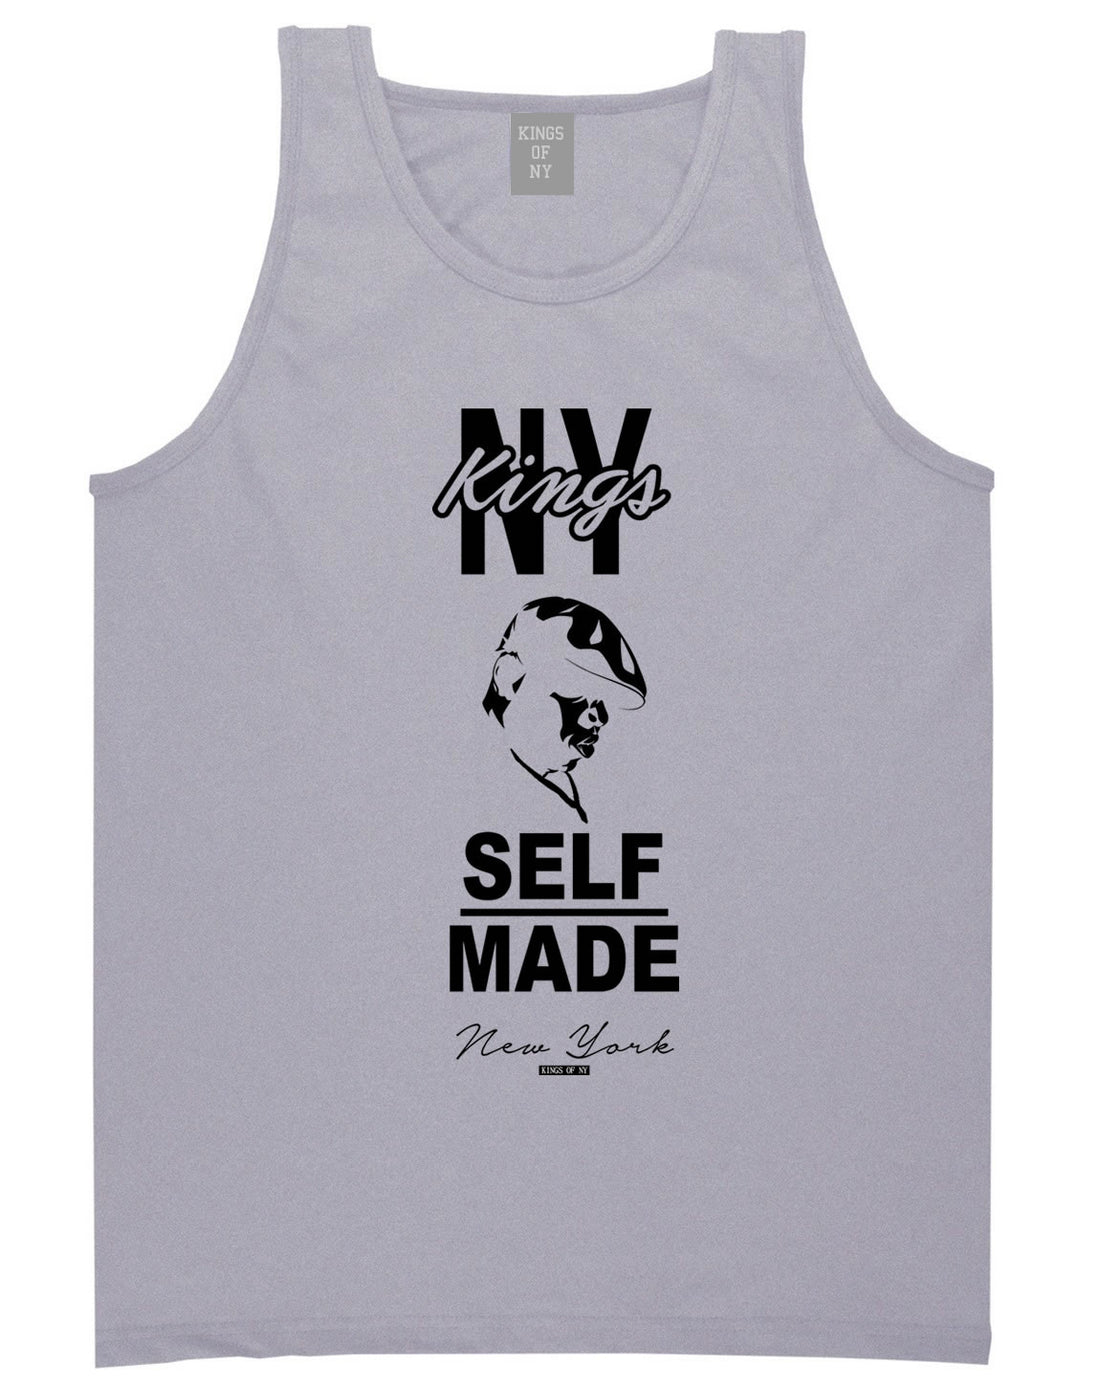 NY Kings Self Made Biggie Tank Top in Grey By Kings Of NY